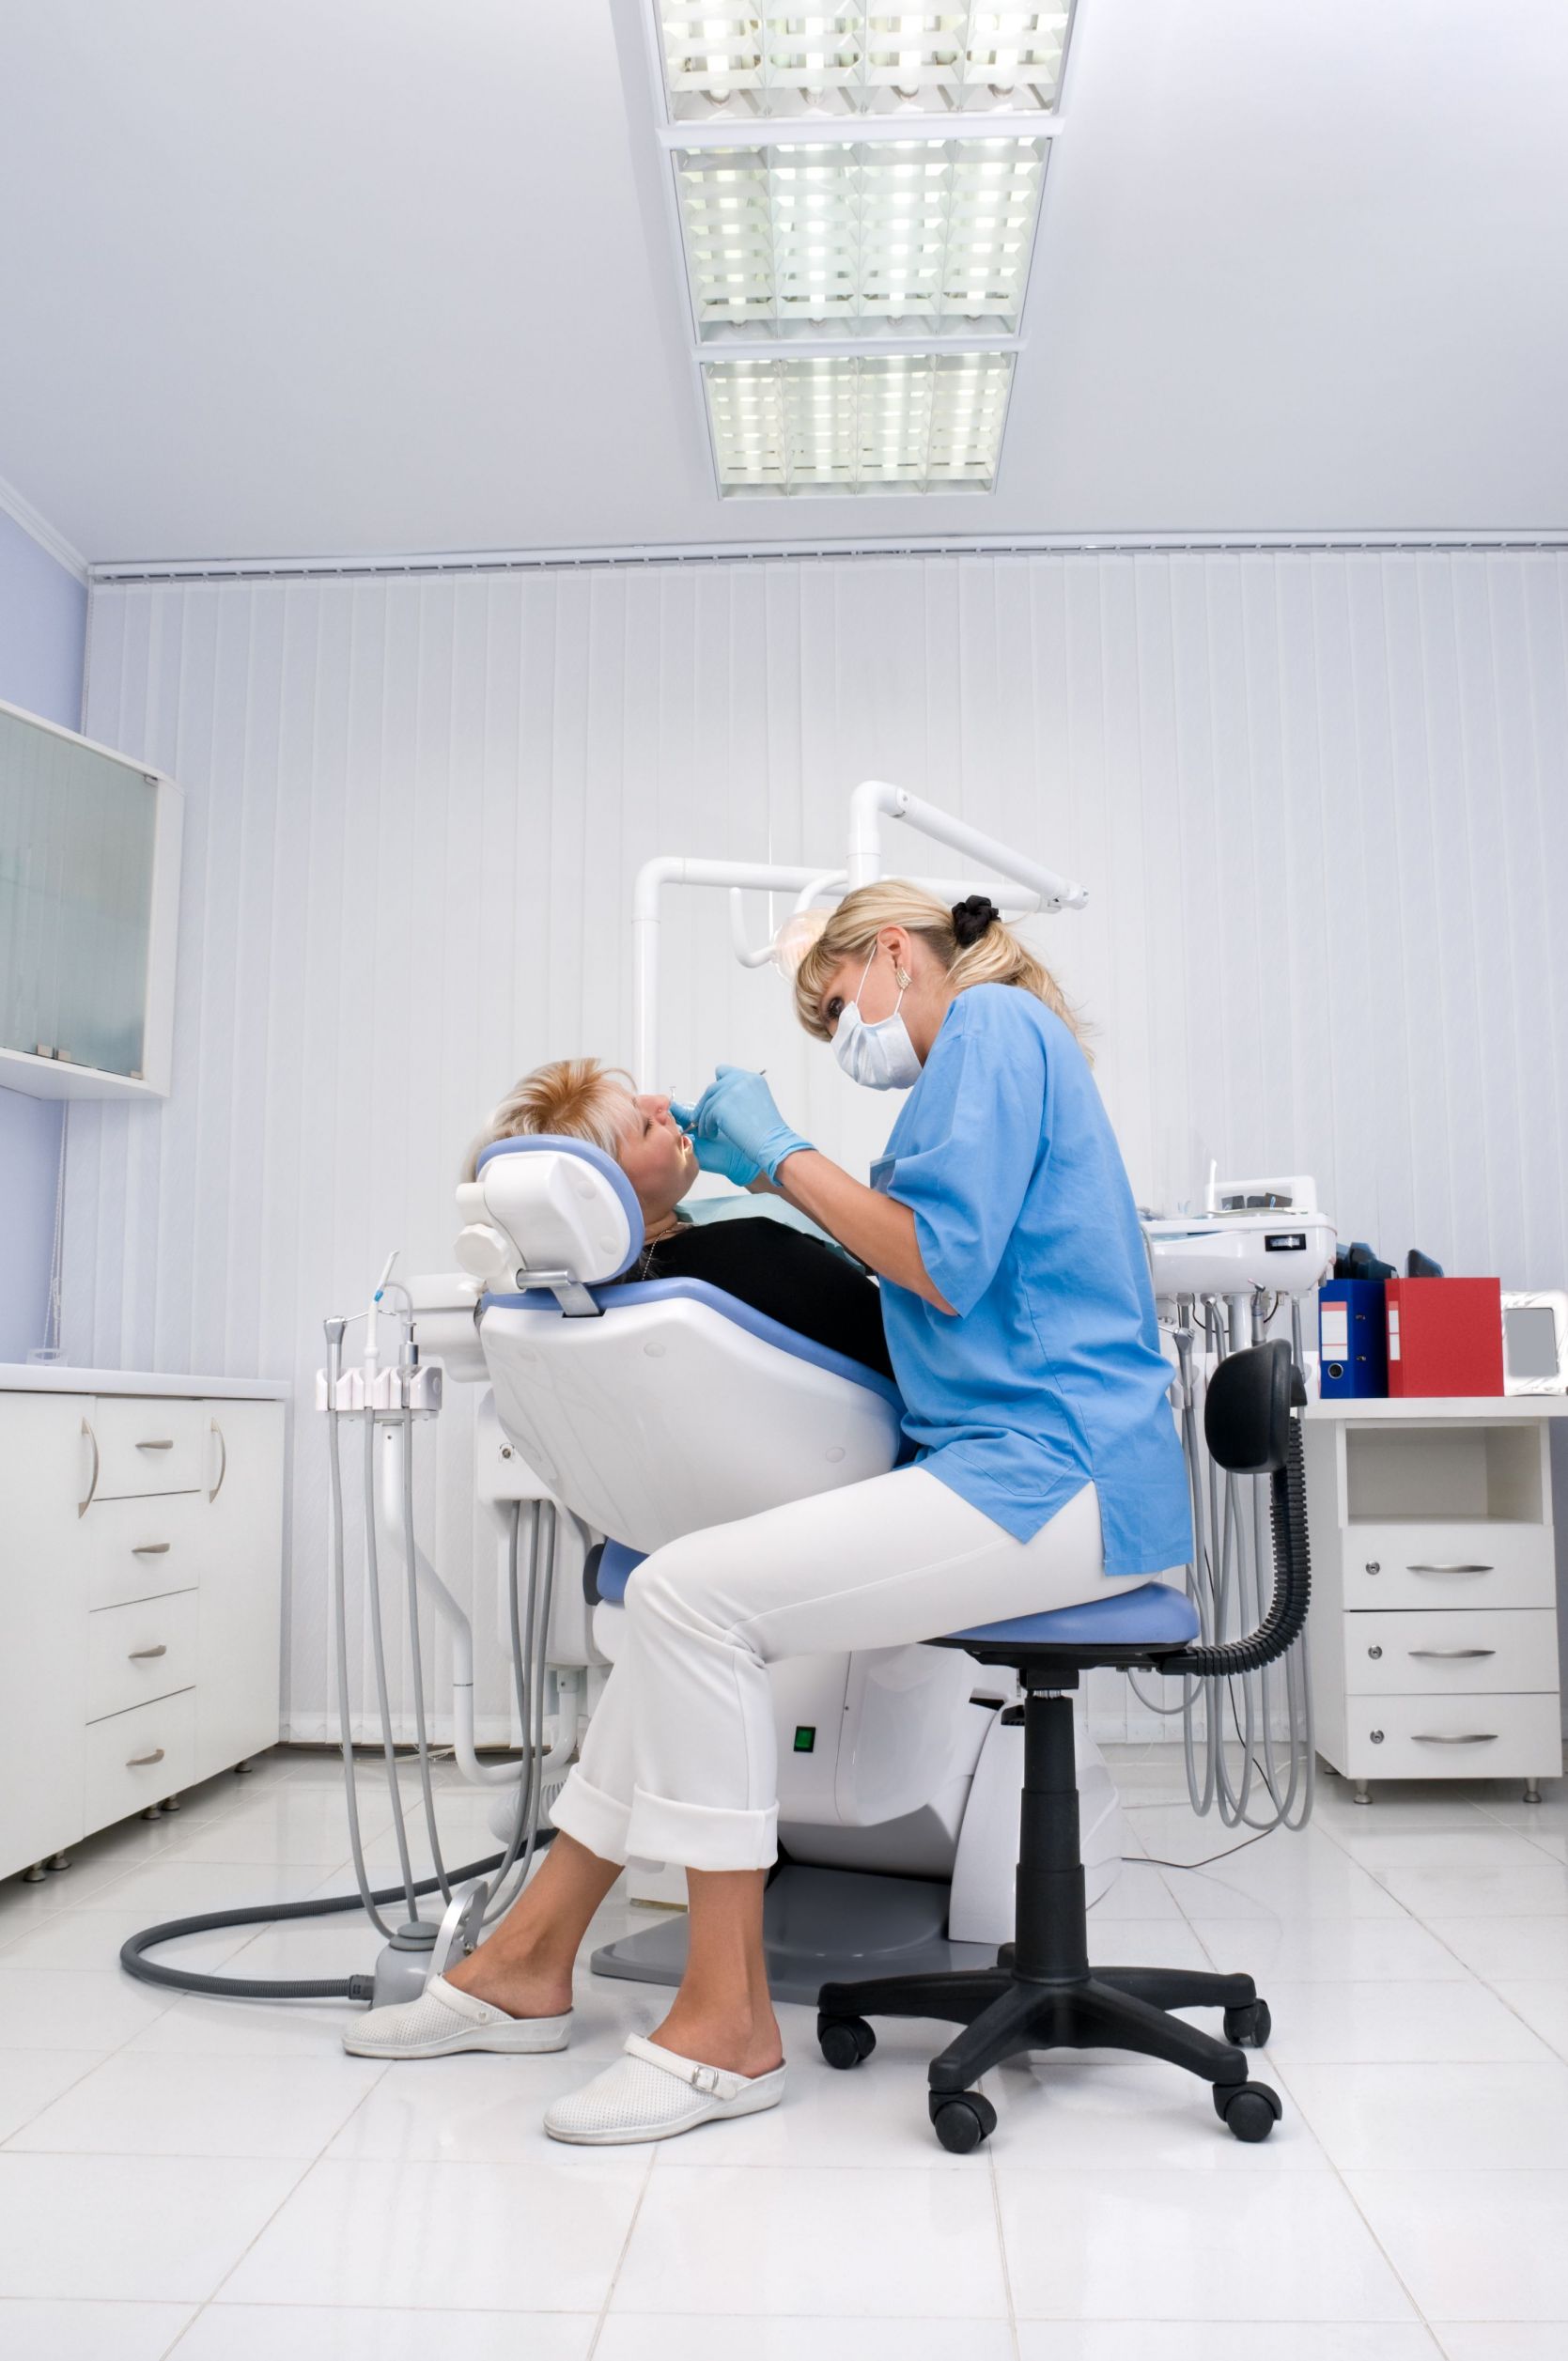 Fear Of Dentists? – How About Sleep Dentistry?